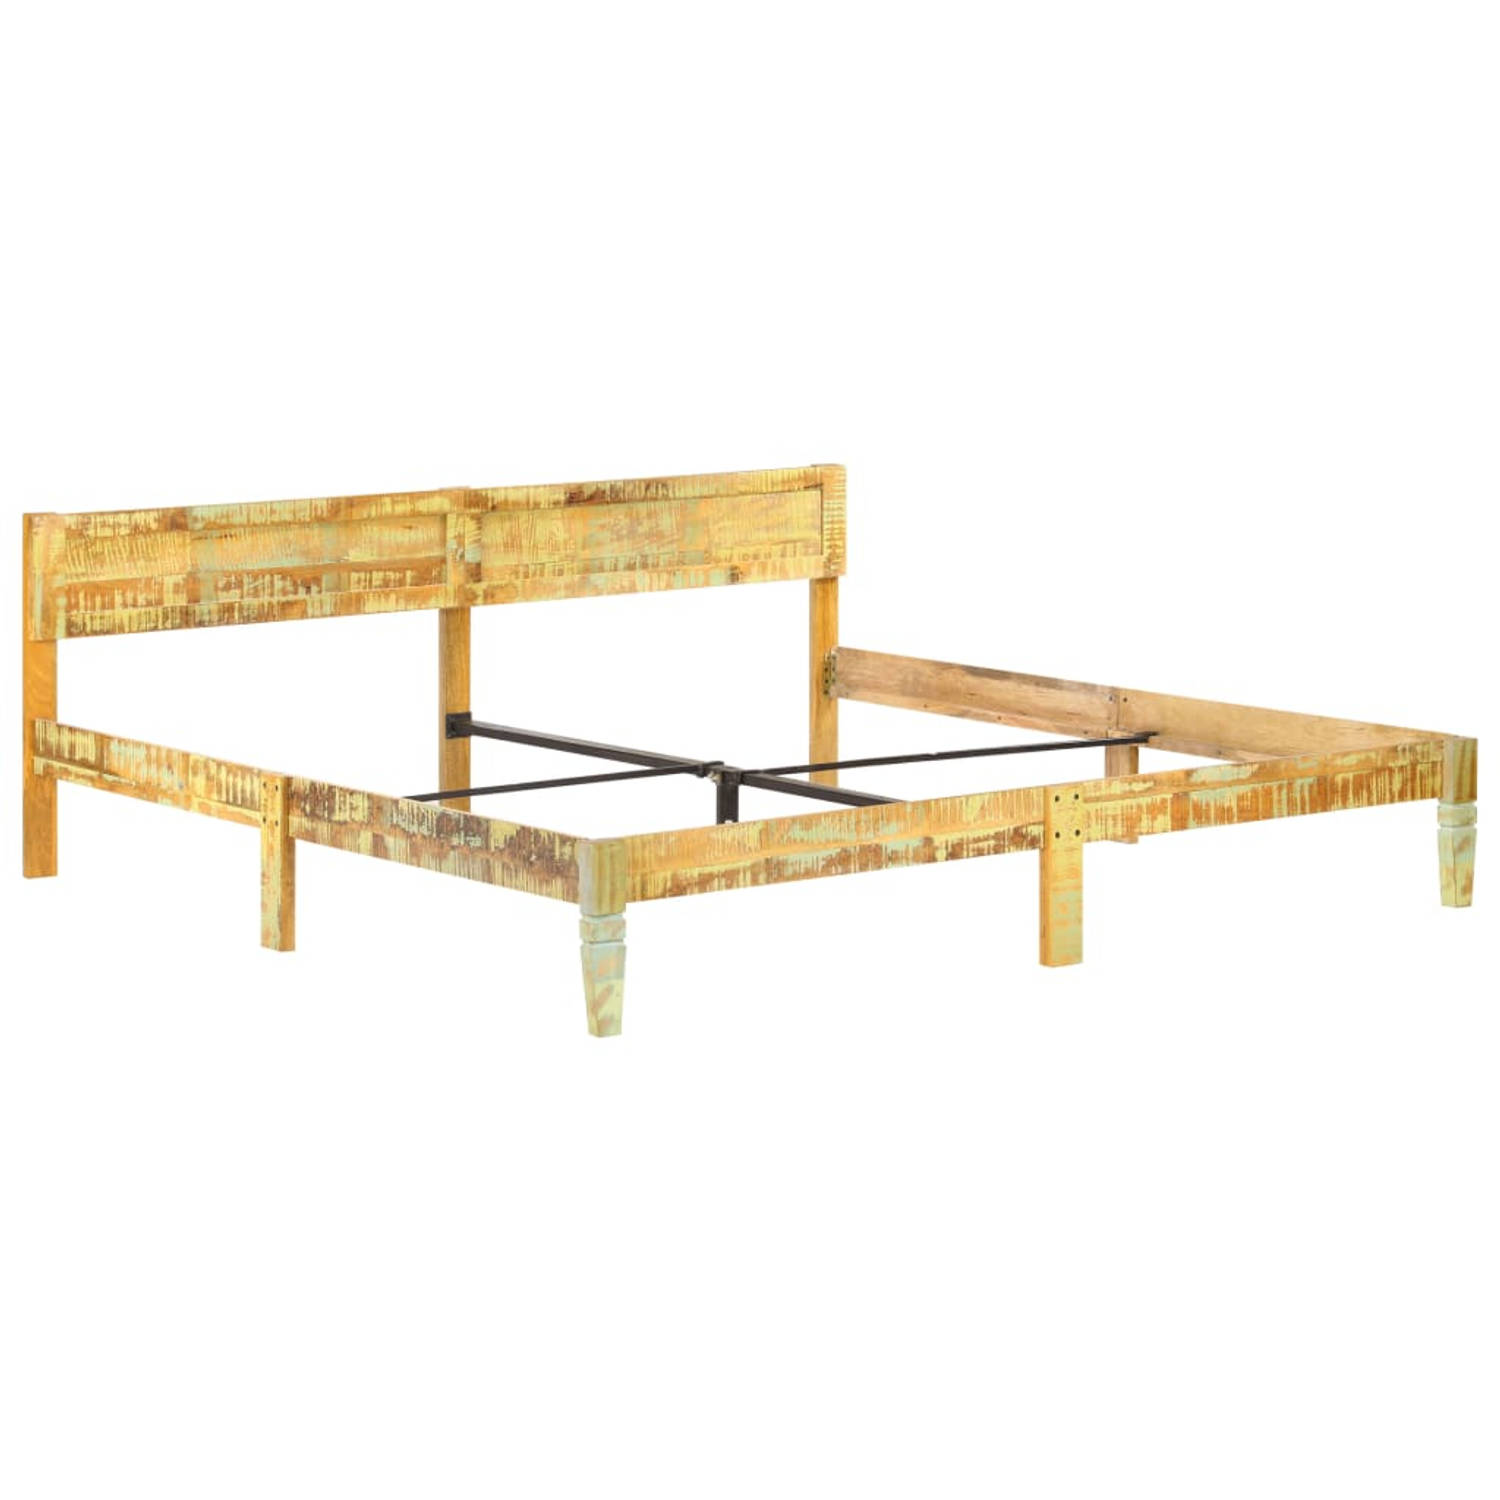 The Living Store Bedframe massief gerecycled hout 200x200 cm - Bedframe - Bedframe - Bed Frame - Bed Frames - Bed - Bedden - 2-persoonsbed - 2-persoonsbedden - Tweepersoons Bed